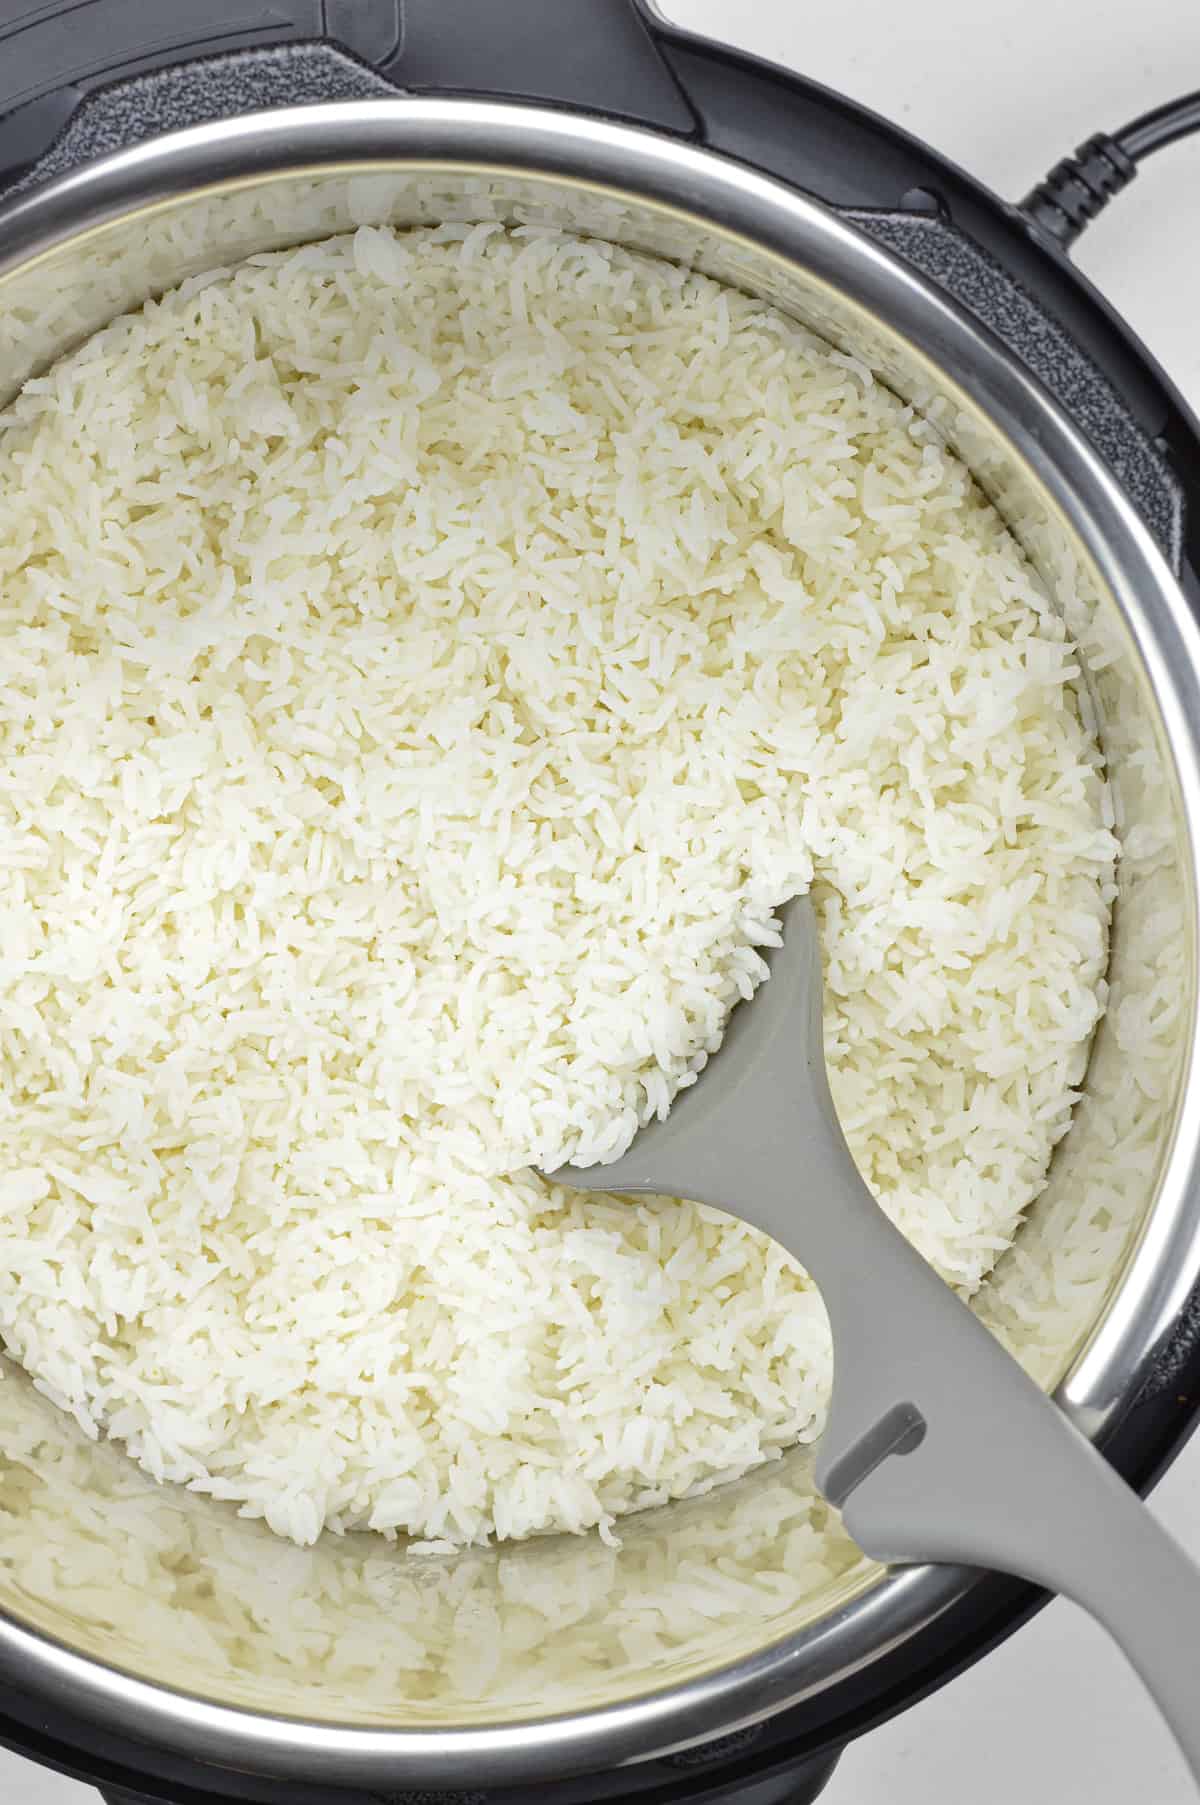 How Long Do I Cook 6 Cups Of Rice In An Electric Pressure Cooker ...